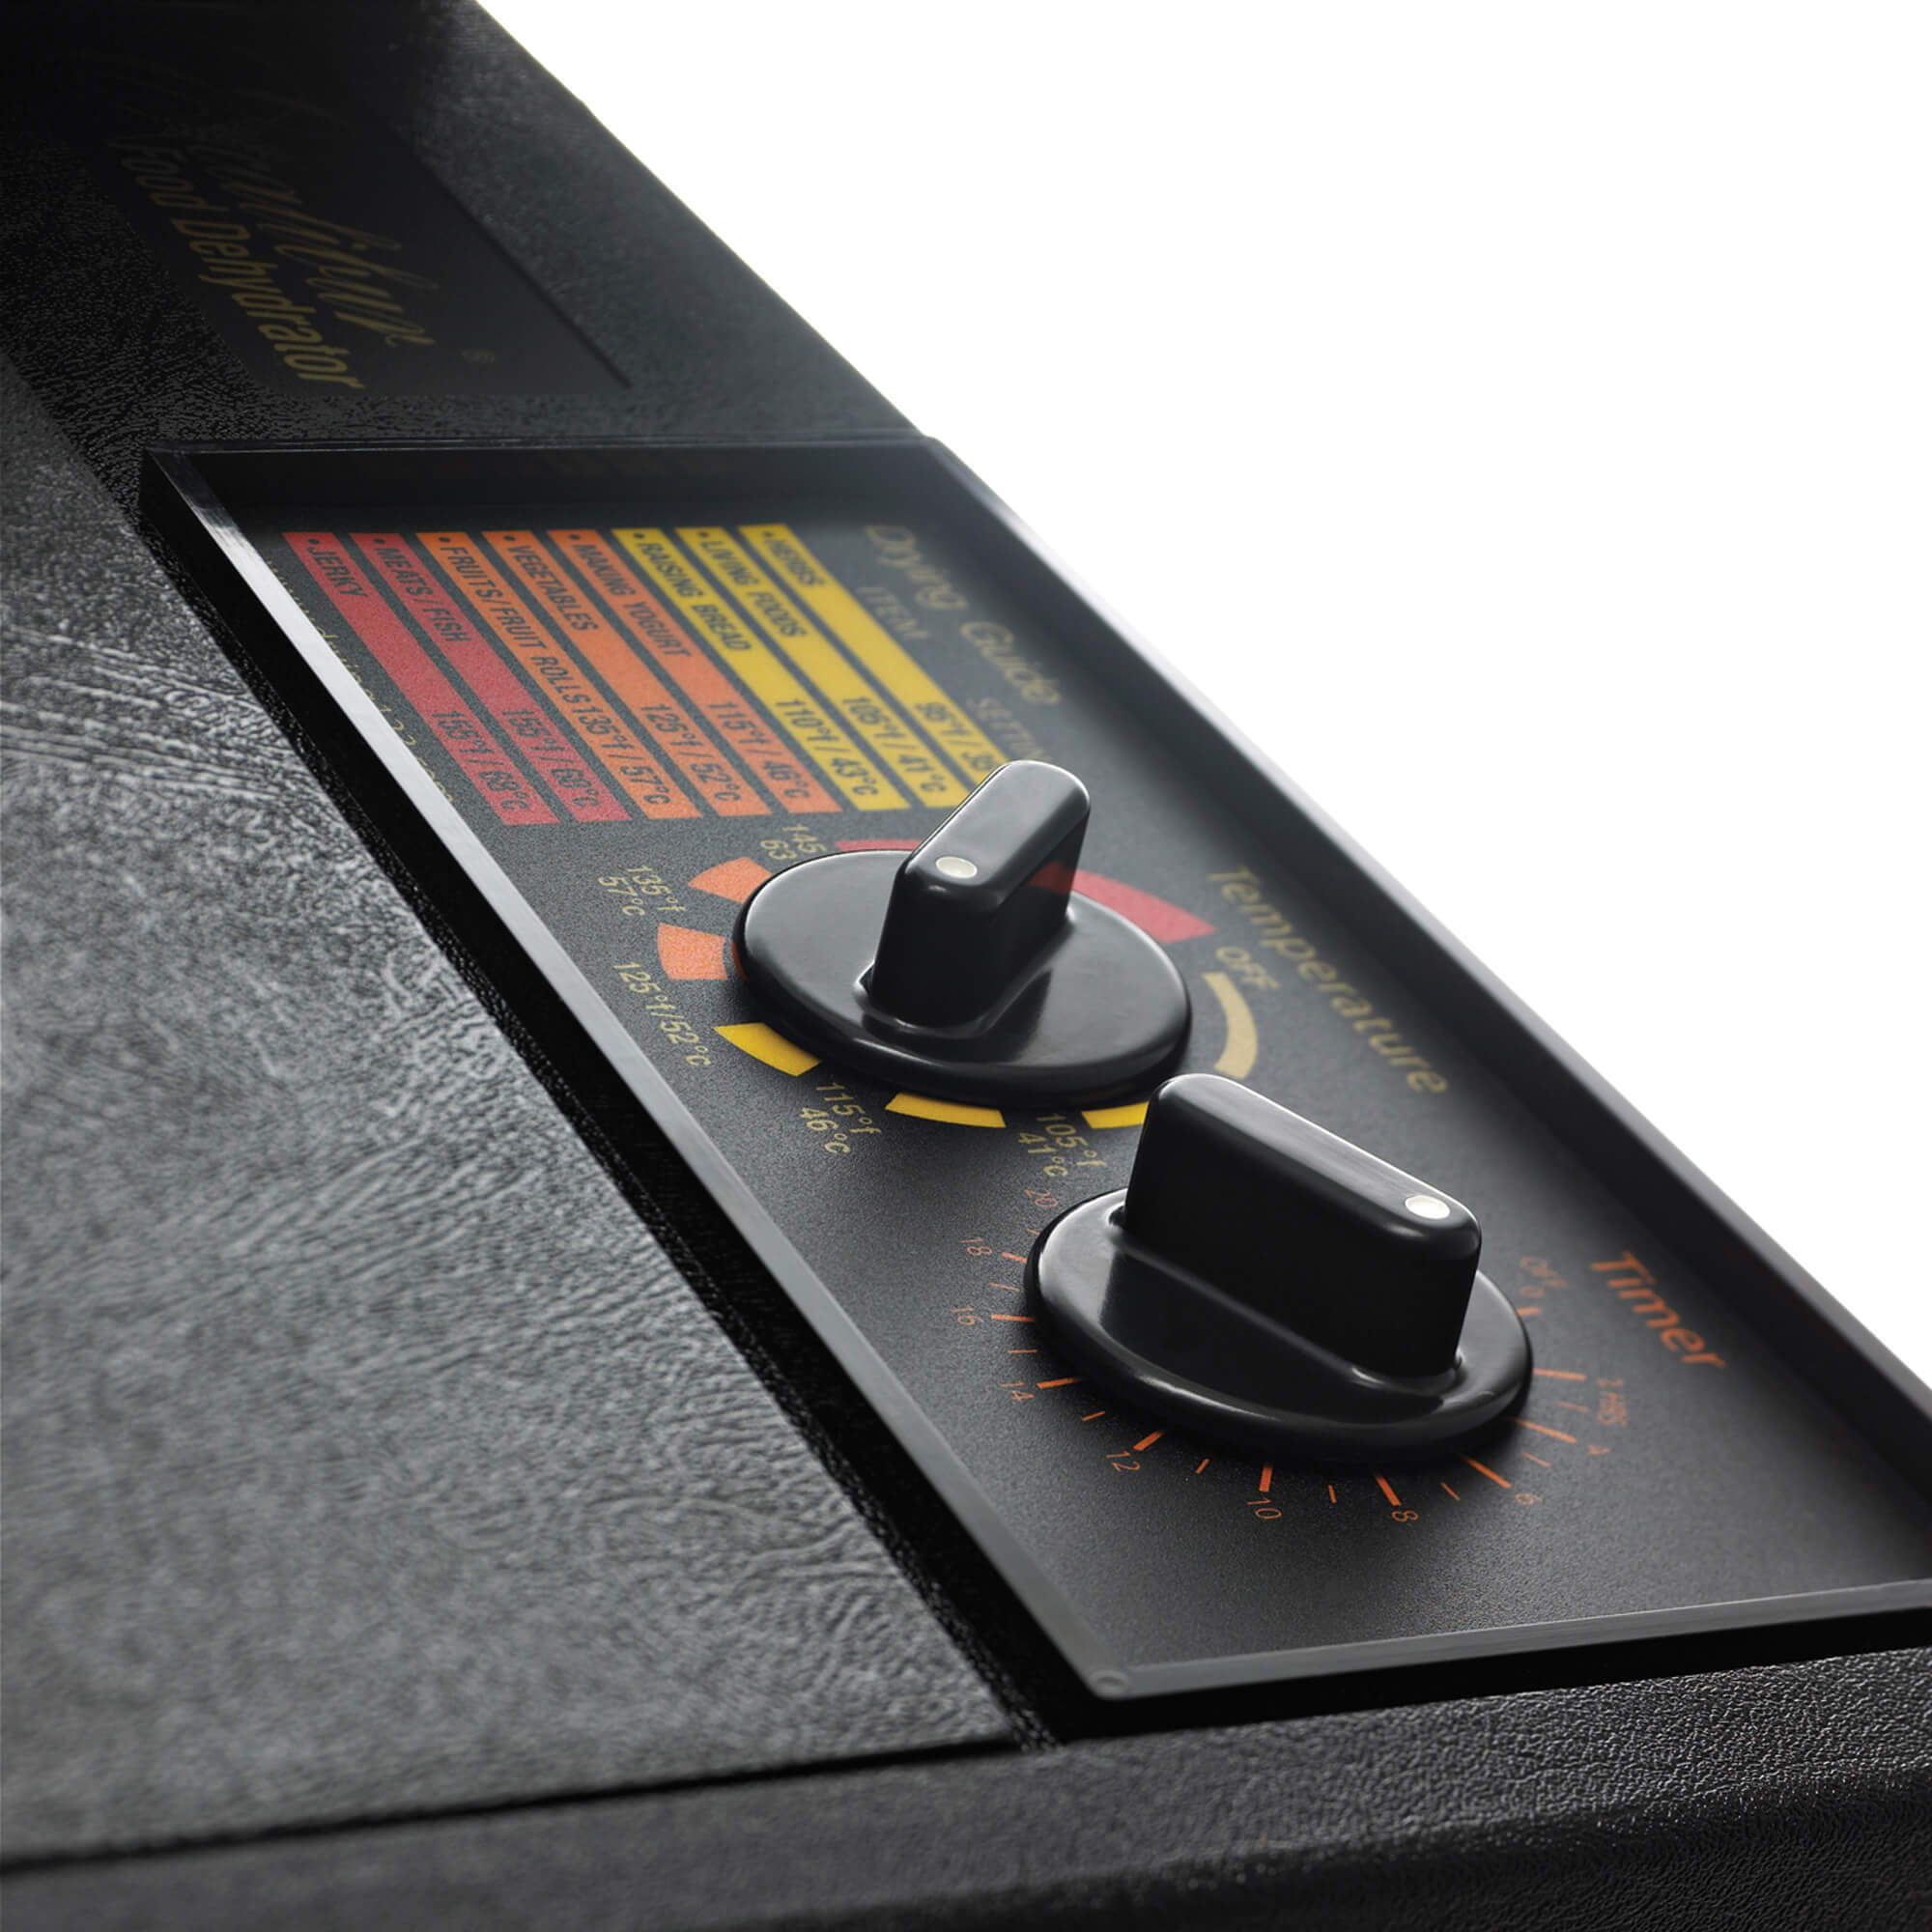 Close up view of the Excalibur 4526TCDB 5 tray dehydrator analogue control knobs.